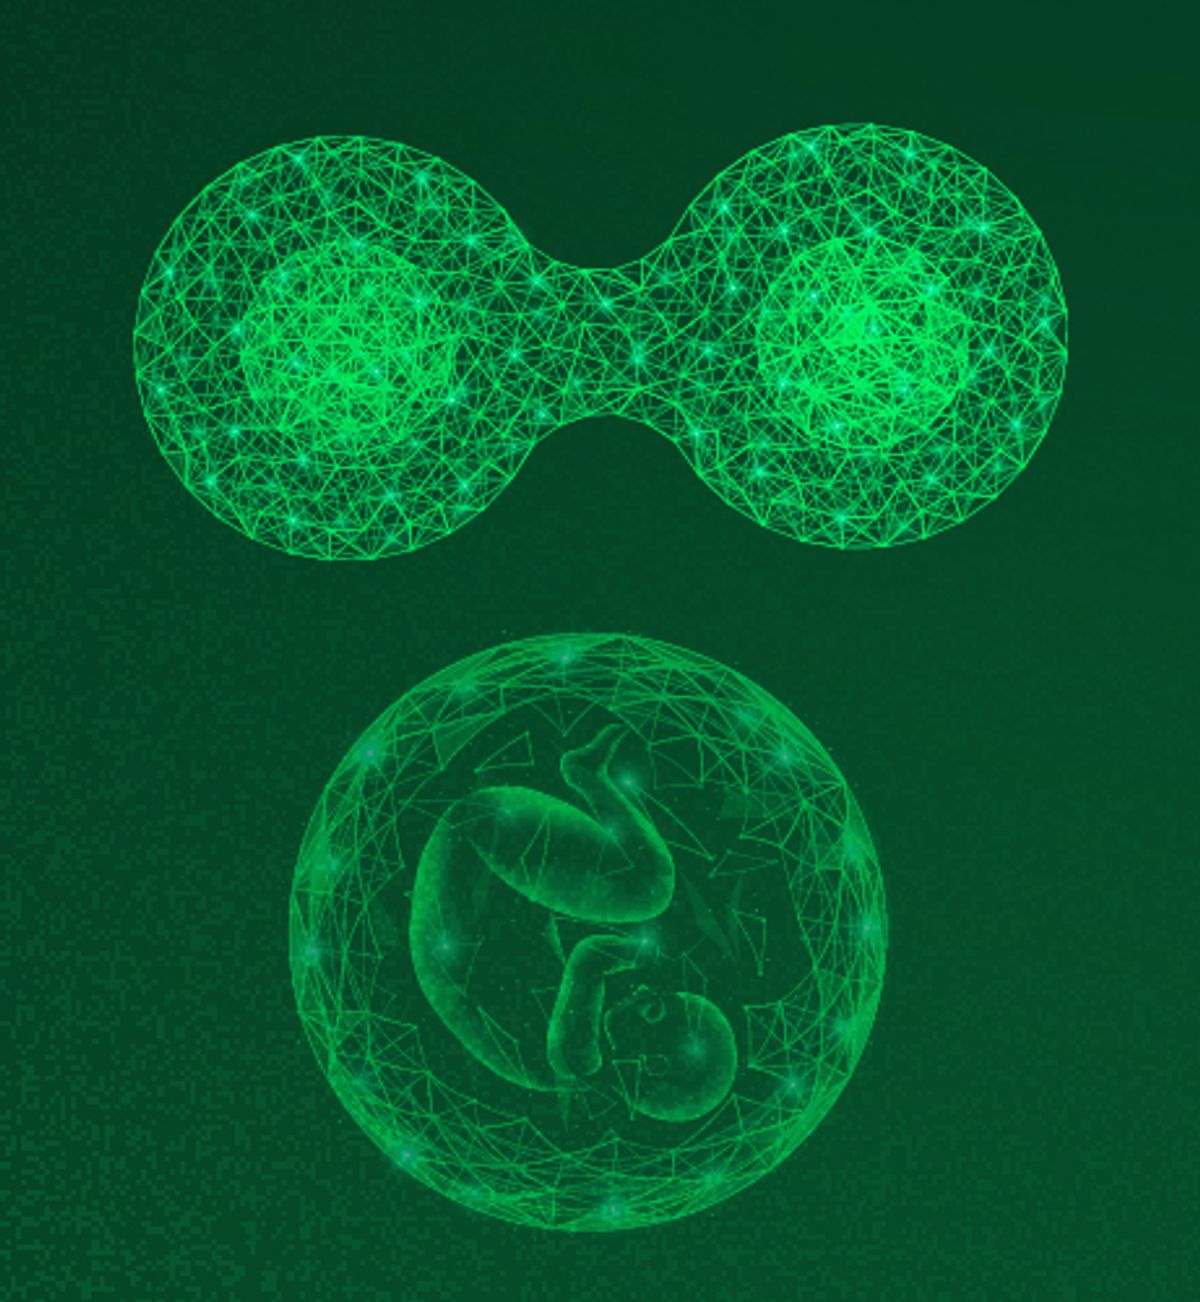 Image of cells dividing and a human embryo 